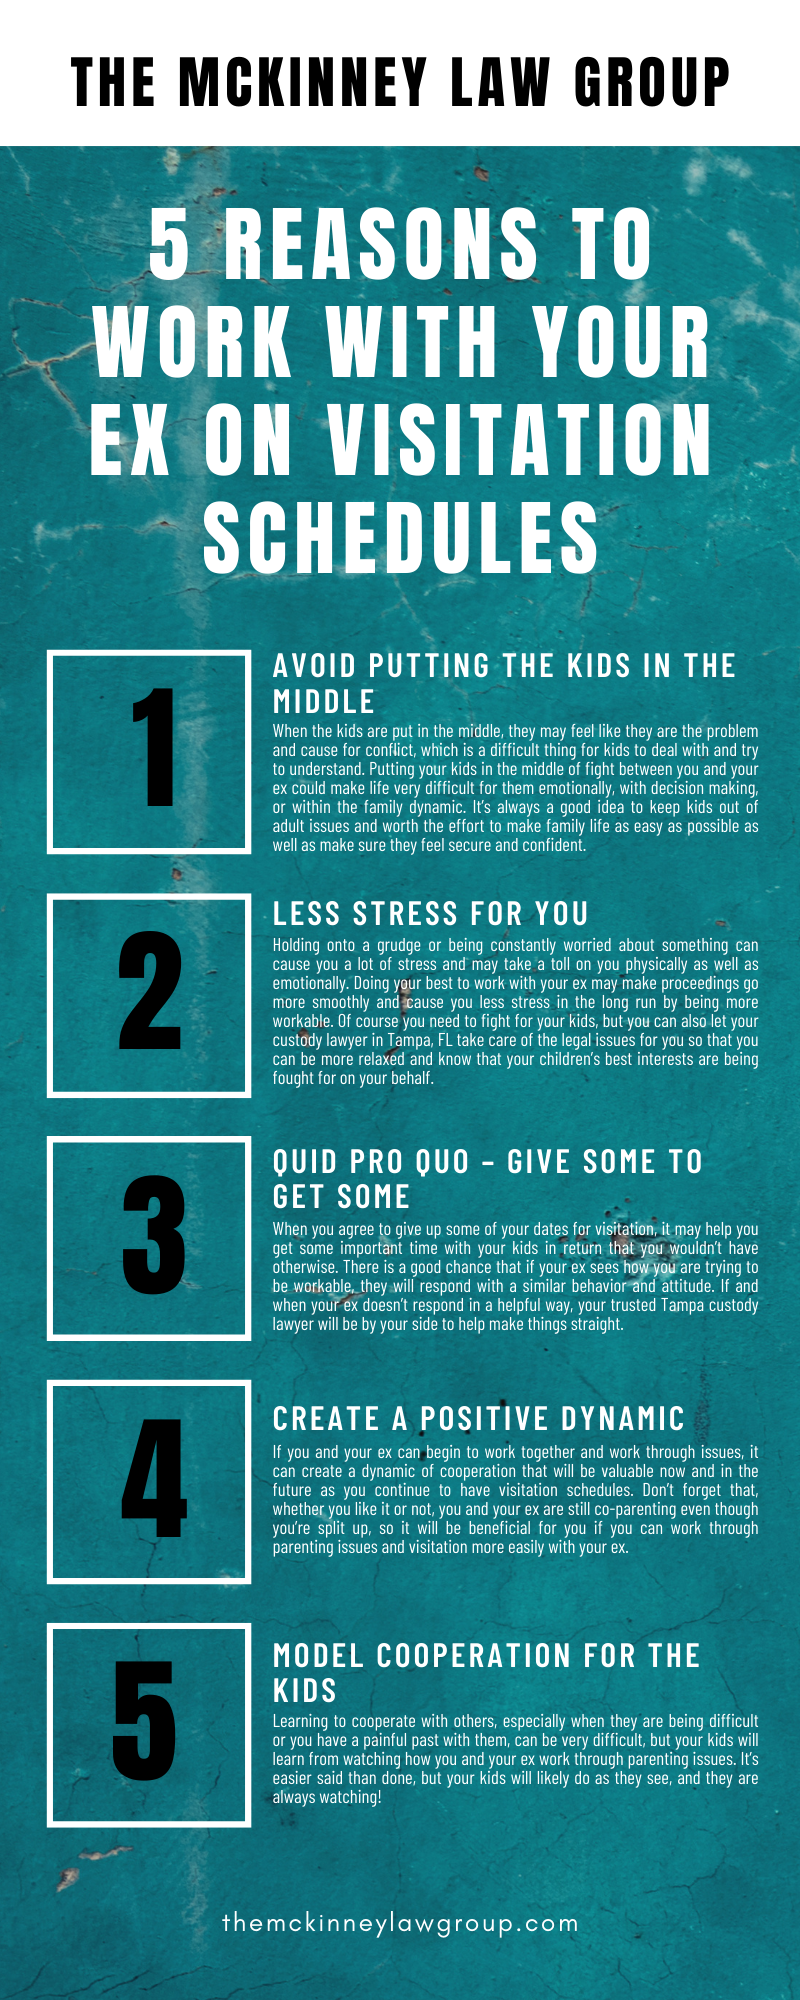 5 REASONS TO WORK WITH YOUR EX ON VISITATION SCHEDULES INFOGRAPHIC